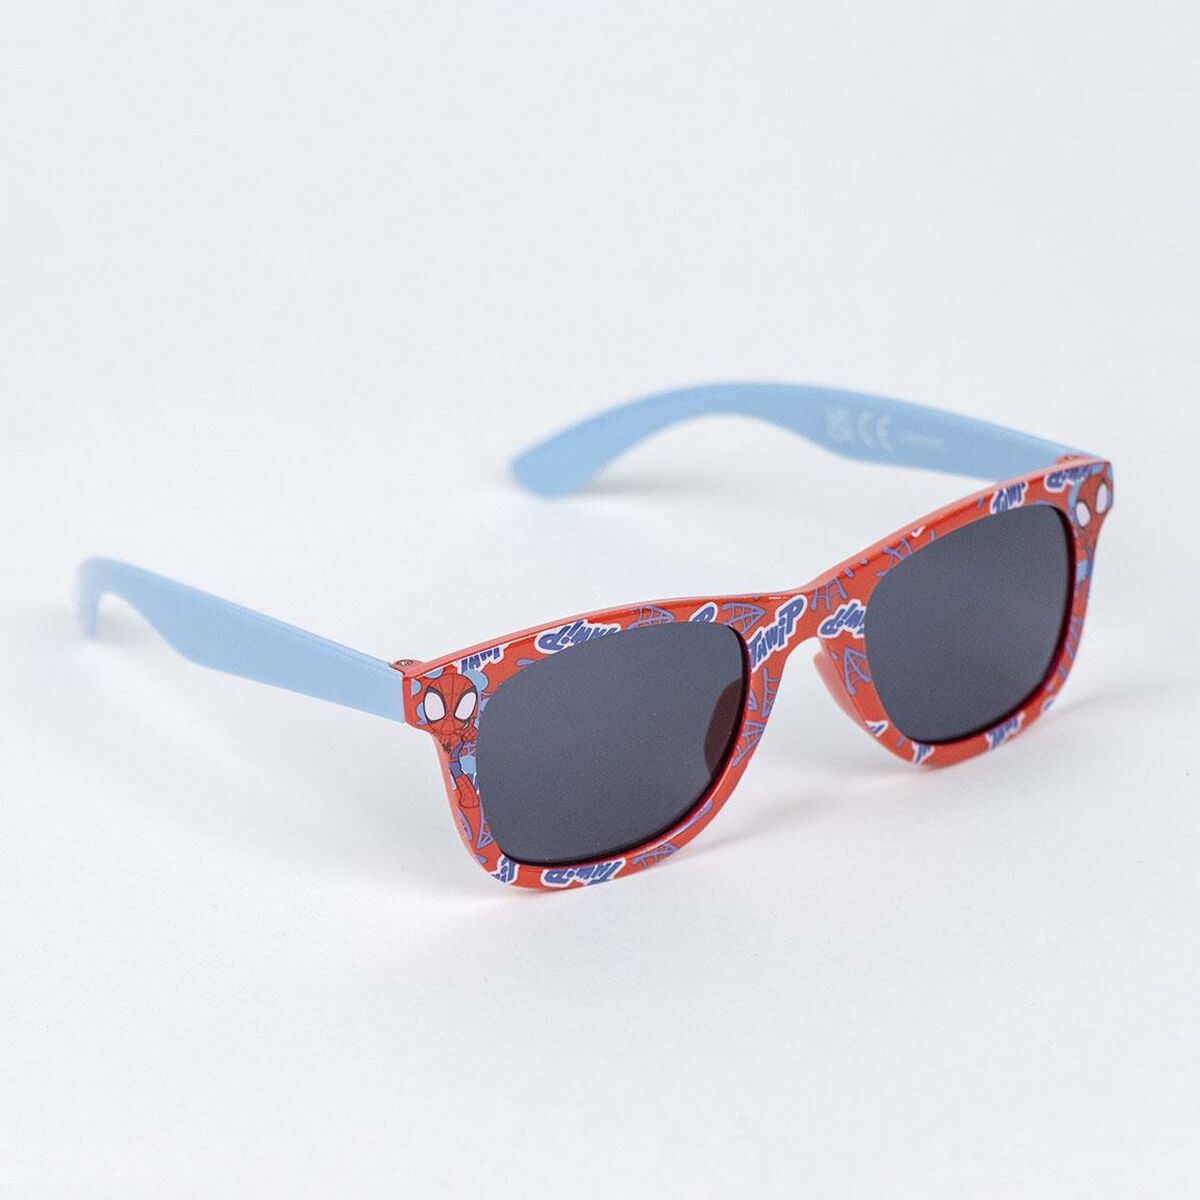 Set of cap and sunglasses Spidey Blue (51 cm) 2 Pieces Red